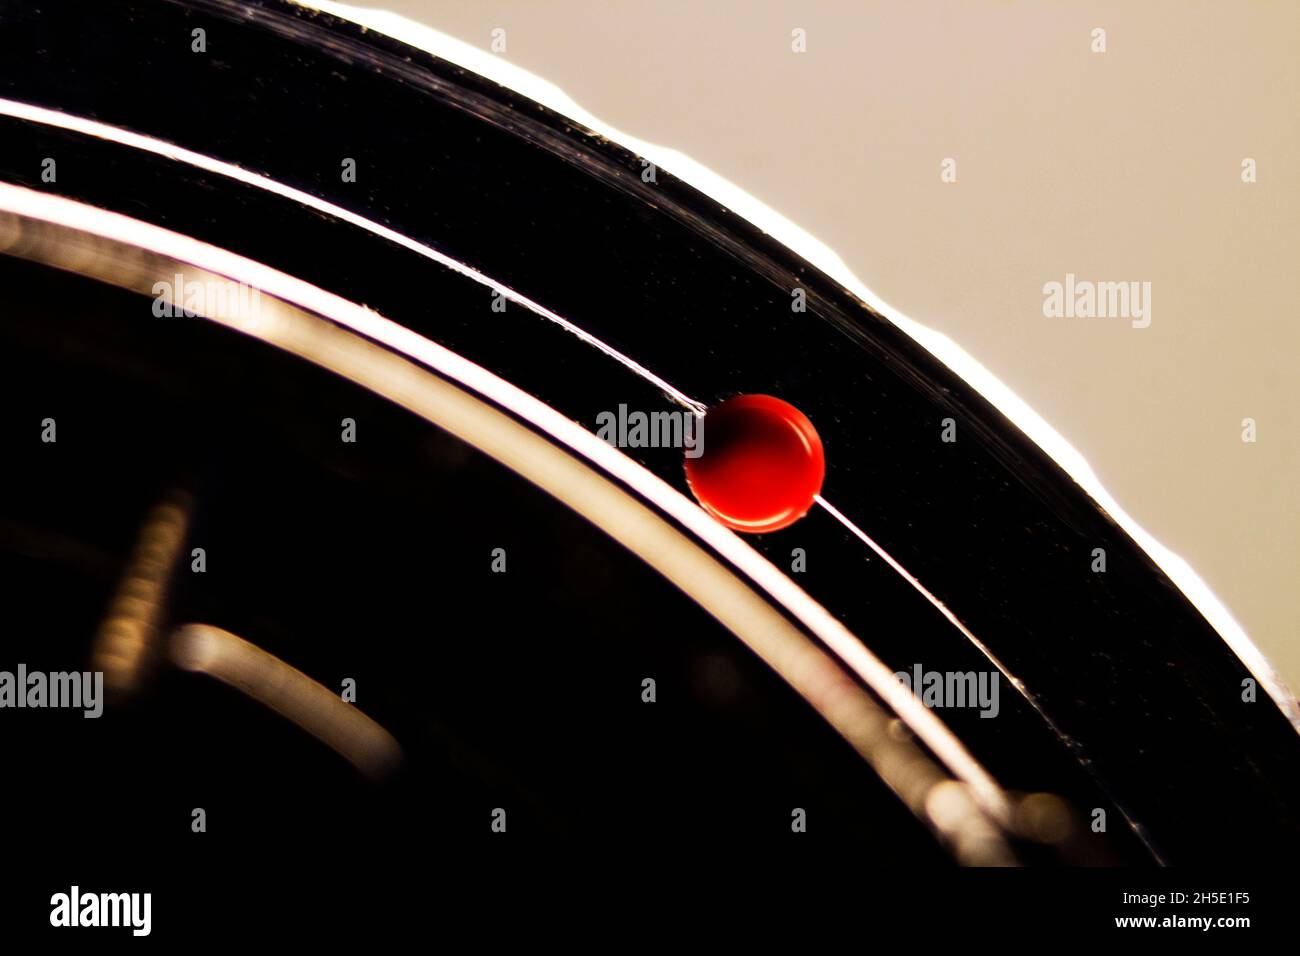 Macro shot of the red dot of a vintage full frame camera lens Stock Photo